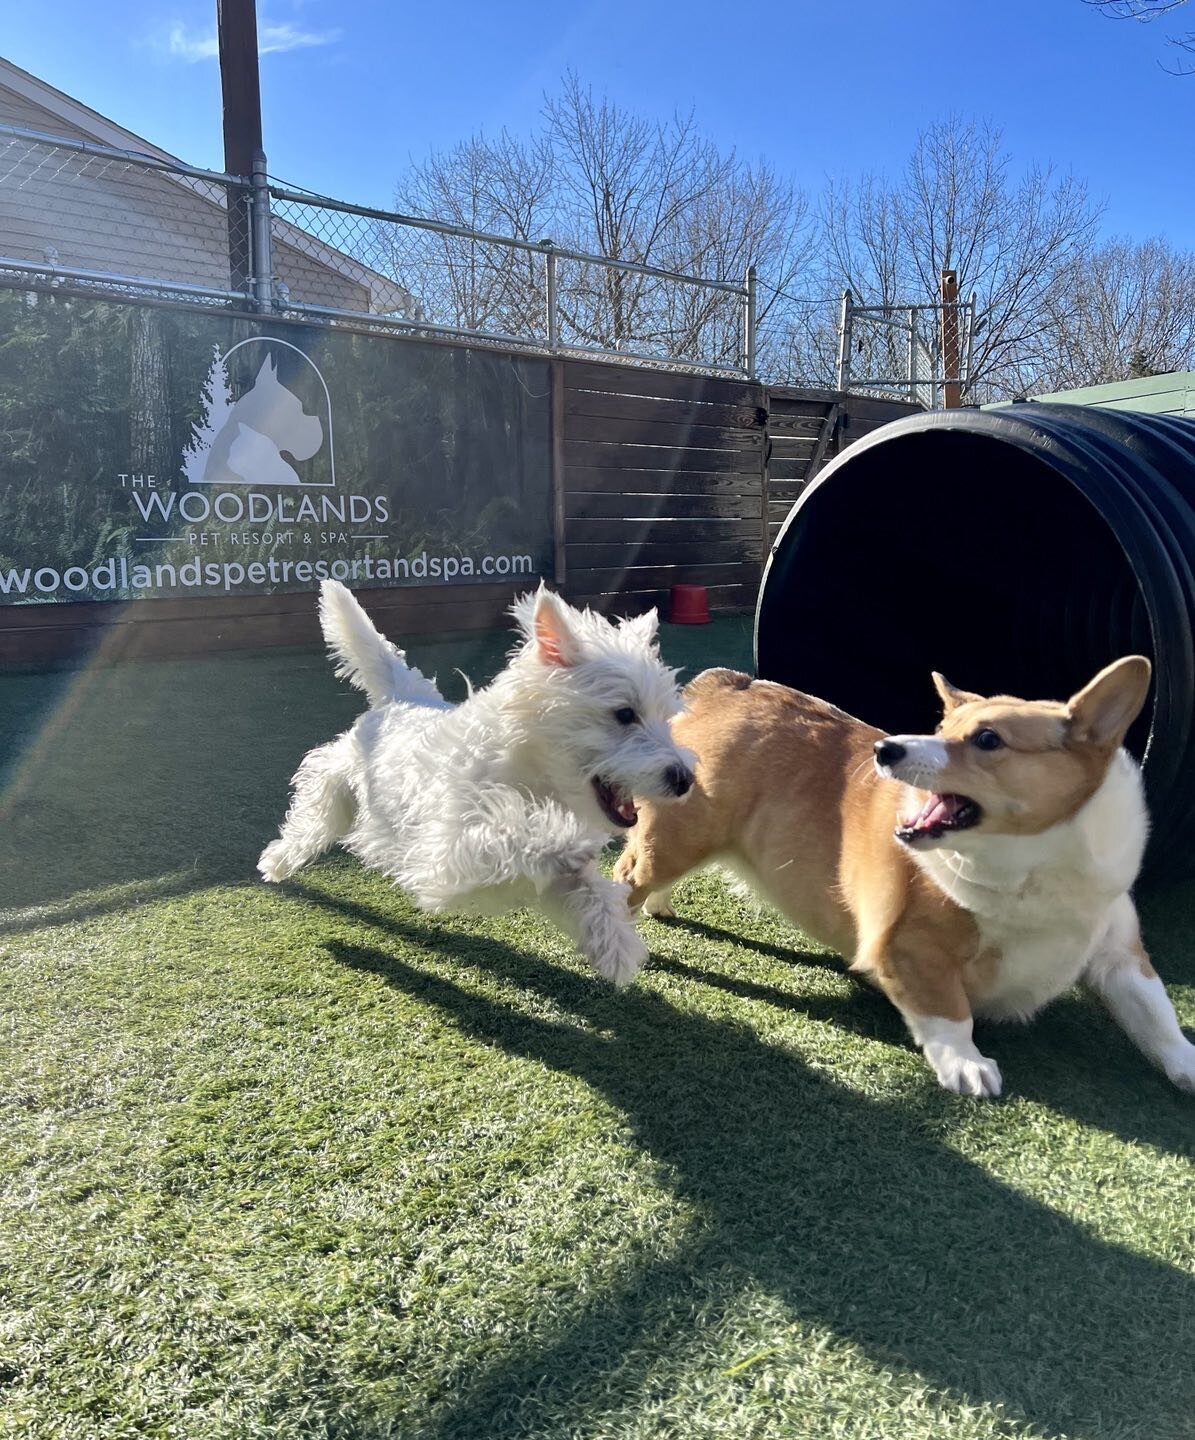 Ivy is having the best time with Bonnie the corgi @thewoodlandsluxurypetresort  I love that they send pictures to me during her playtime at doggy daycare. Warms my heart seeing her soooo happy 🥰